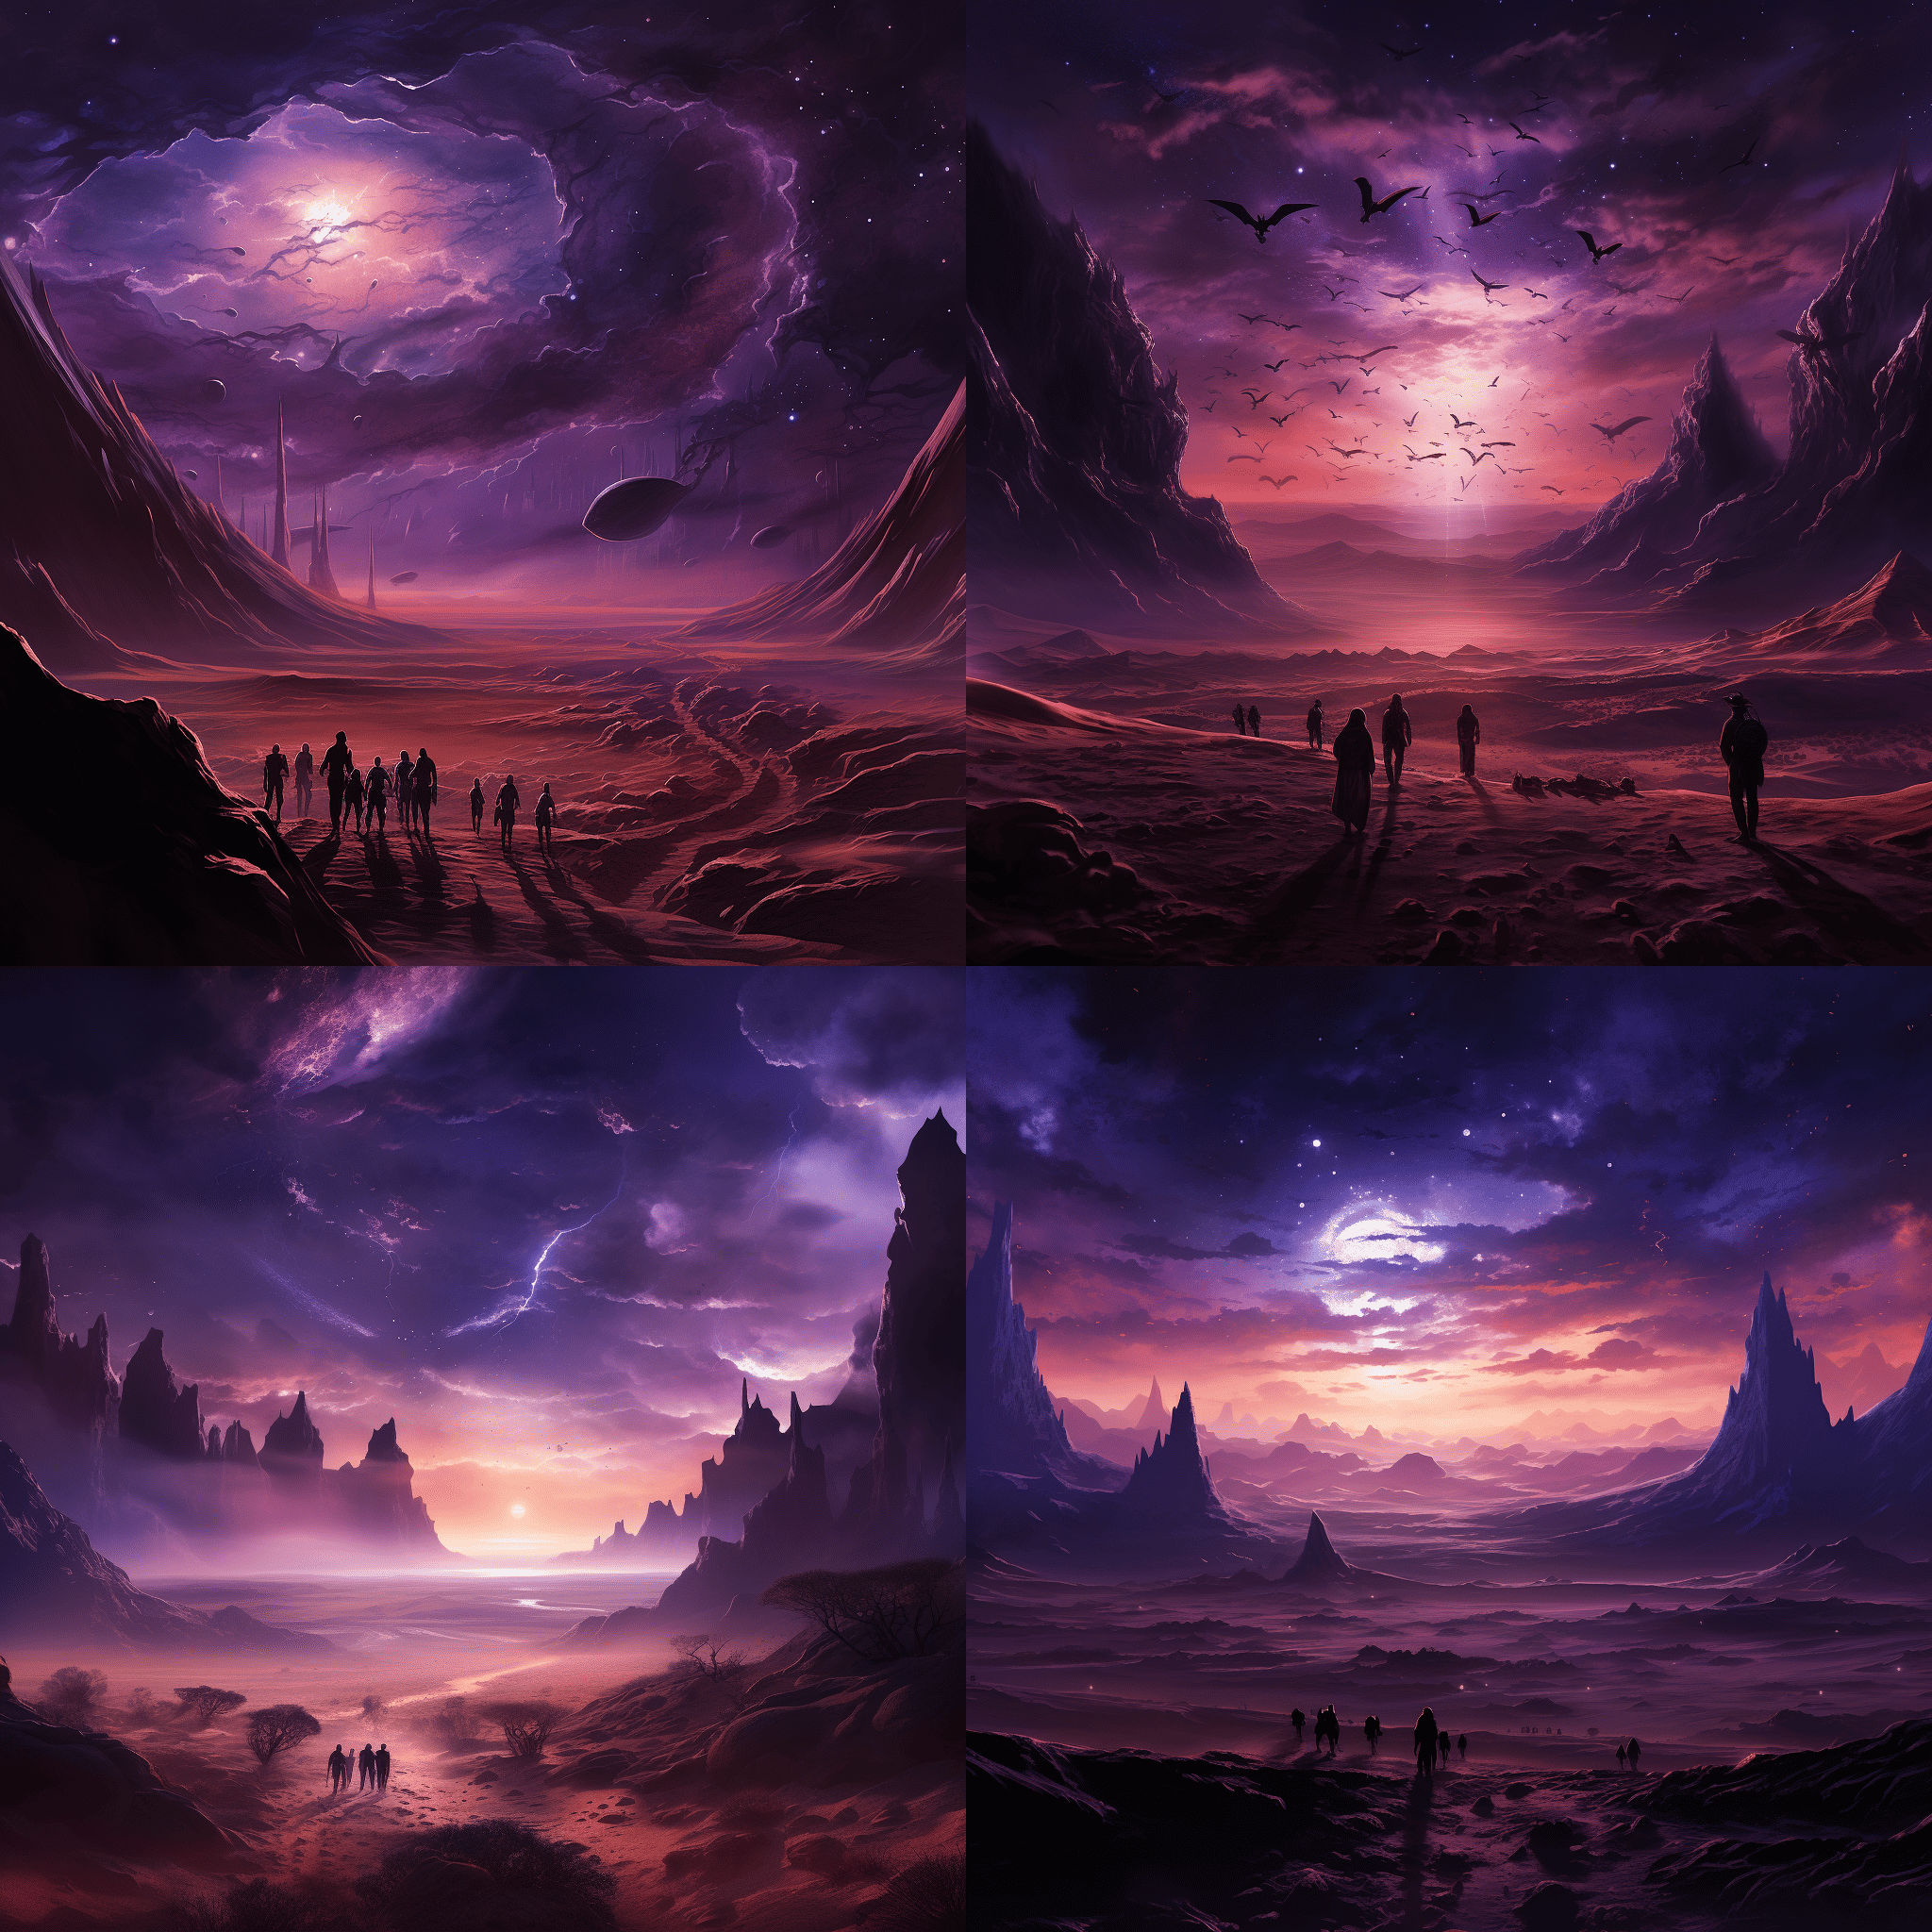 A vast desert with shifting purple sands under a galaxy-filled sky, with silhouettes of nomads traveling on giant winged creatures